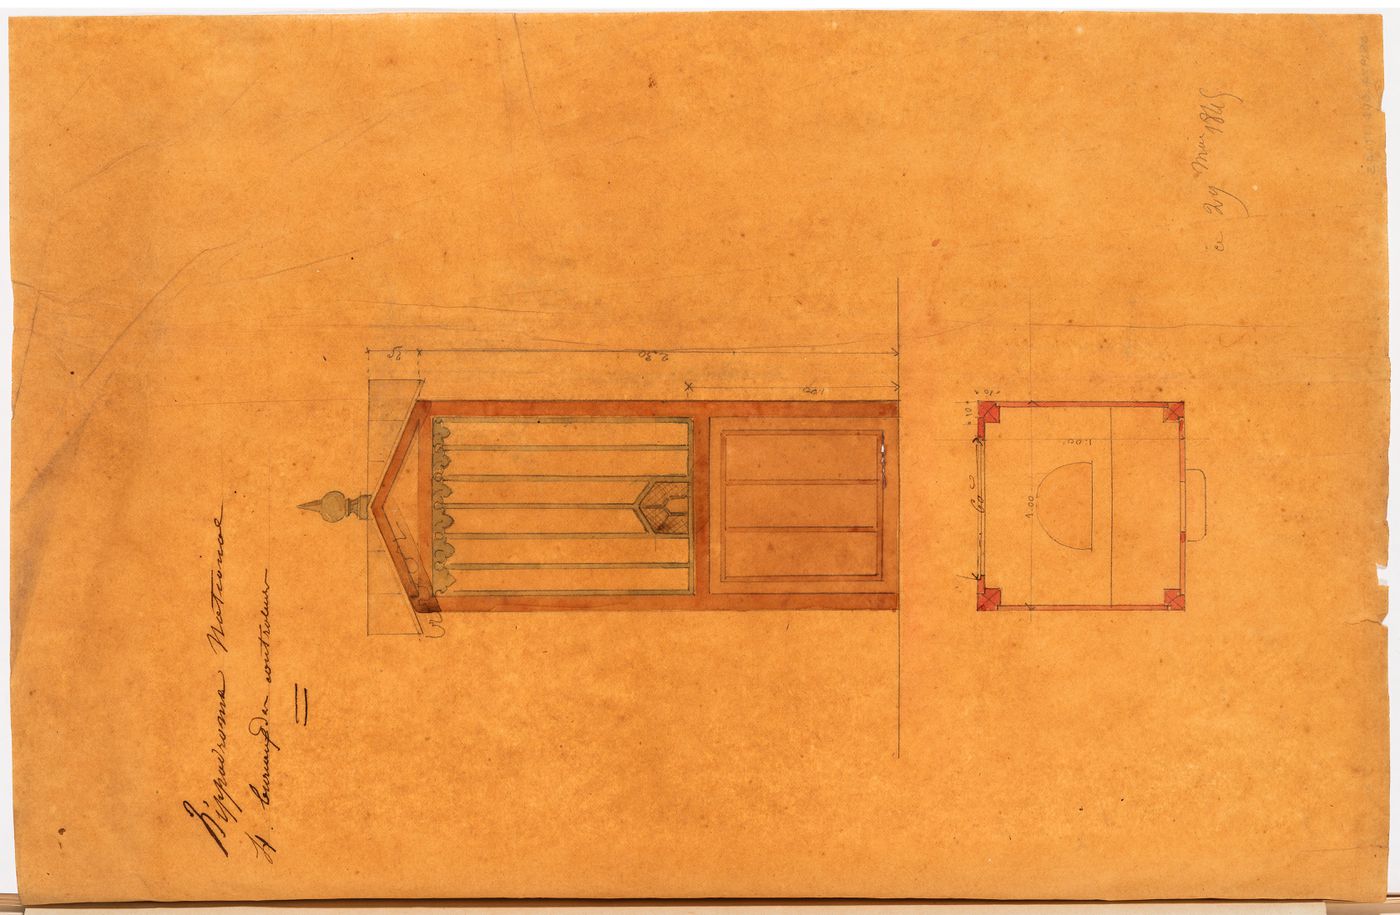 Hippodrome national, Paris: Elevation and plan for a ticket booth